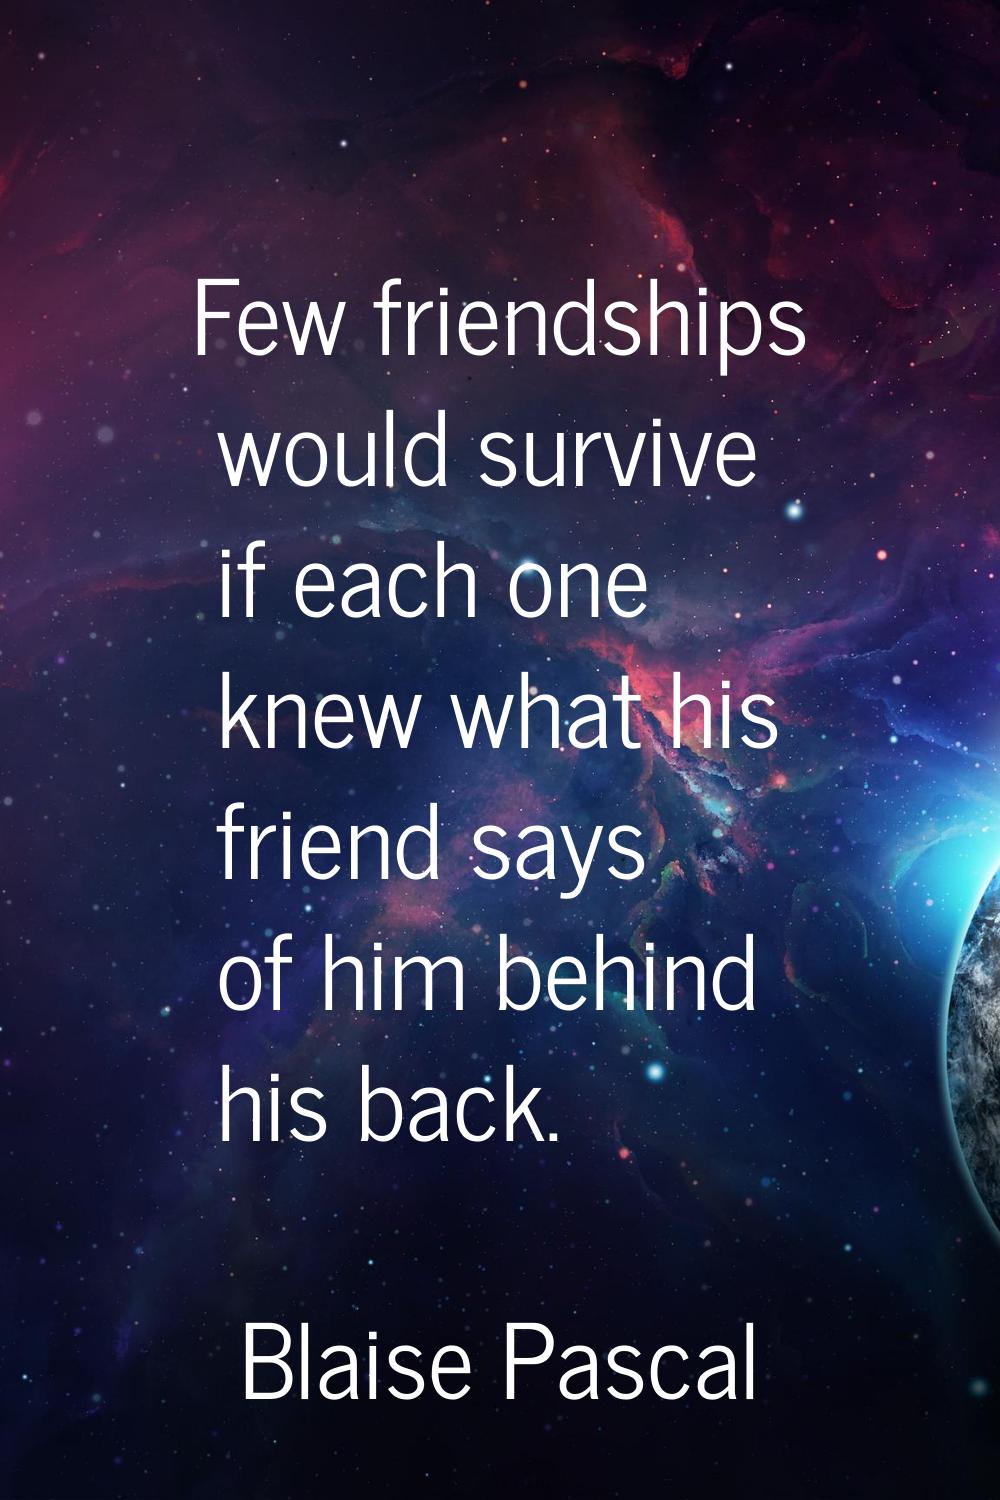 Few friendships would survive if each one knew what his friend says of him behind his back.